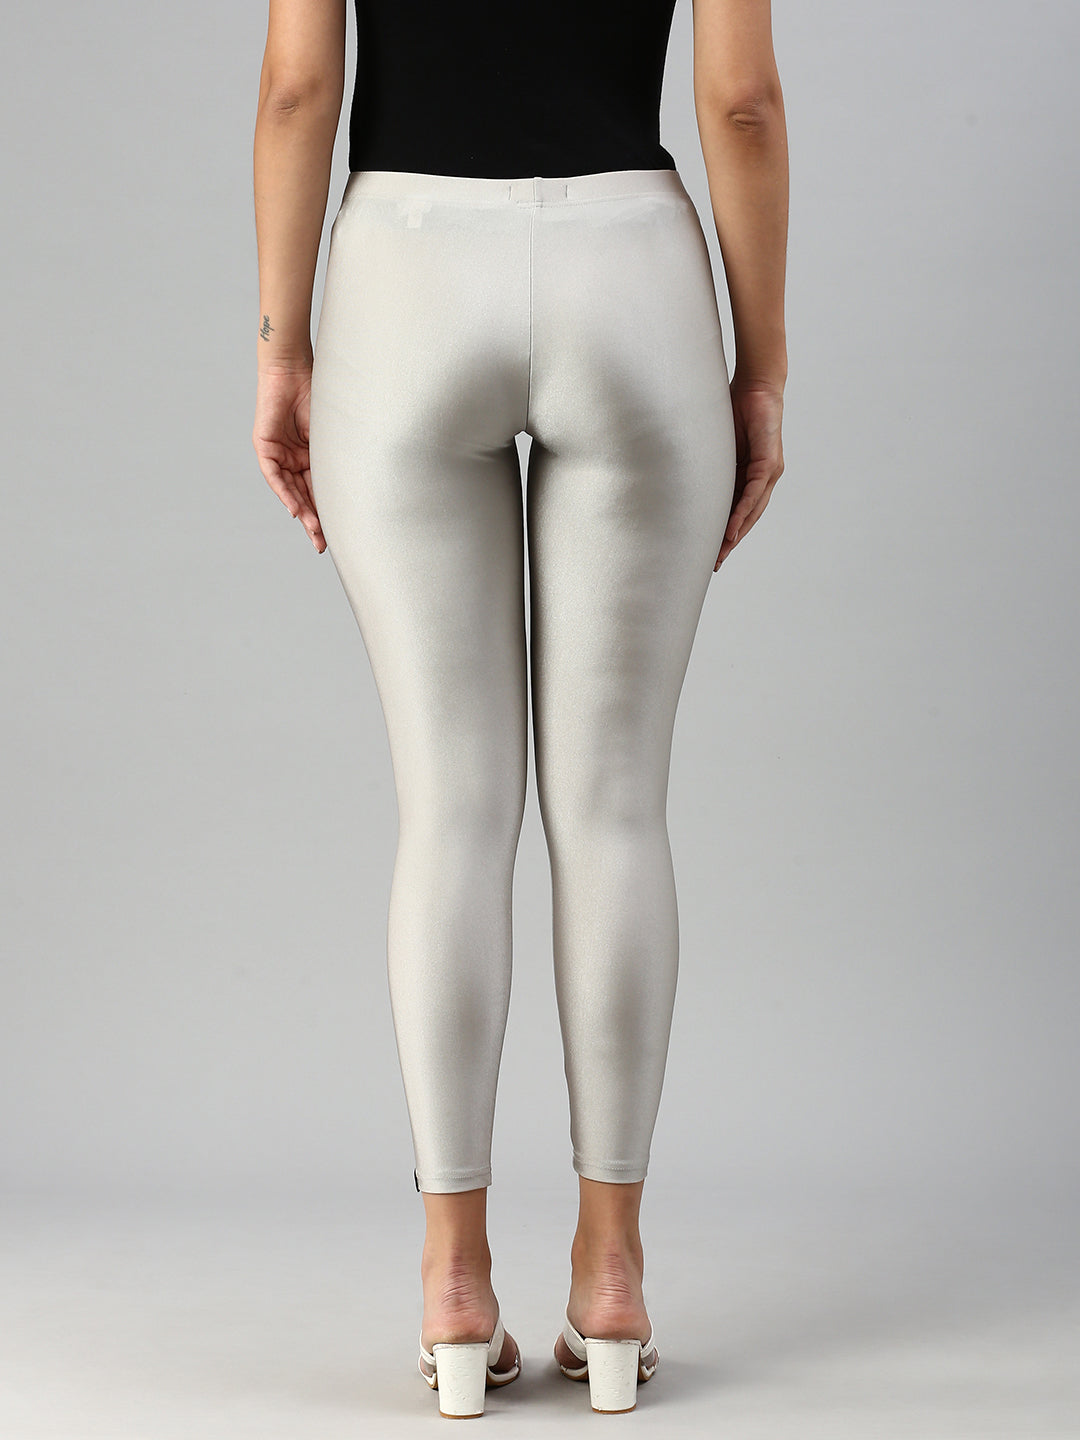 Silver Grey Solid Cotton Spandex Ankle Length Legging